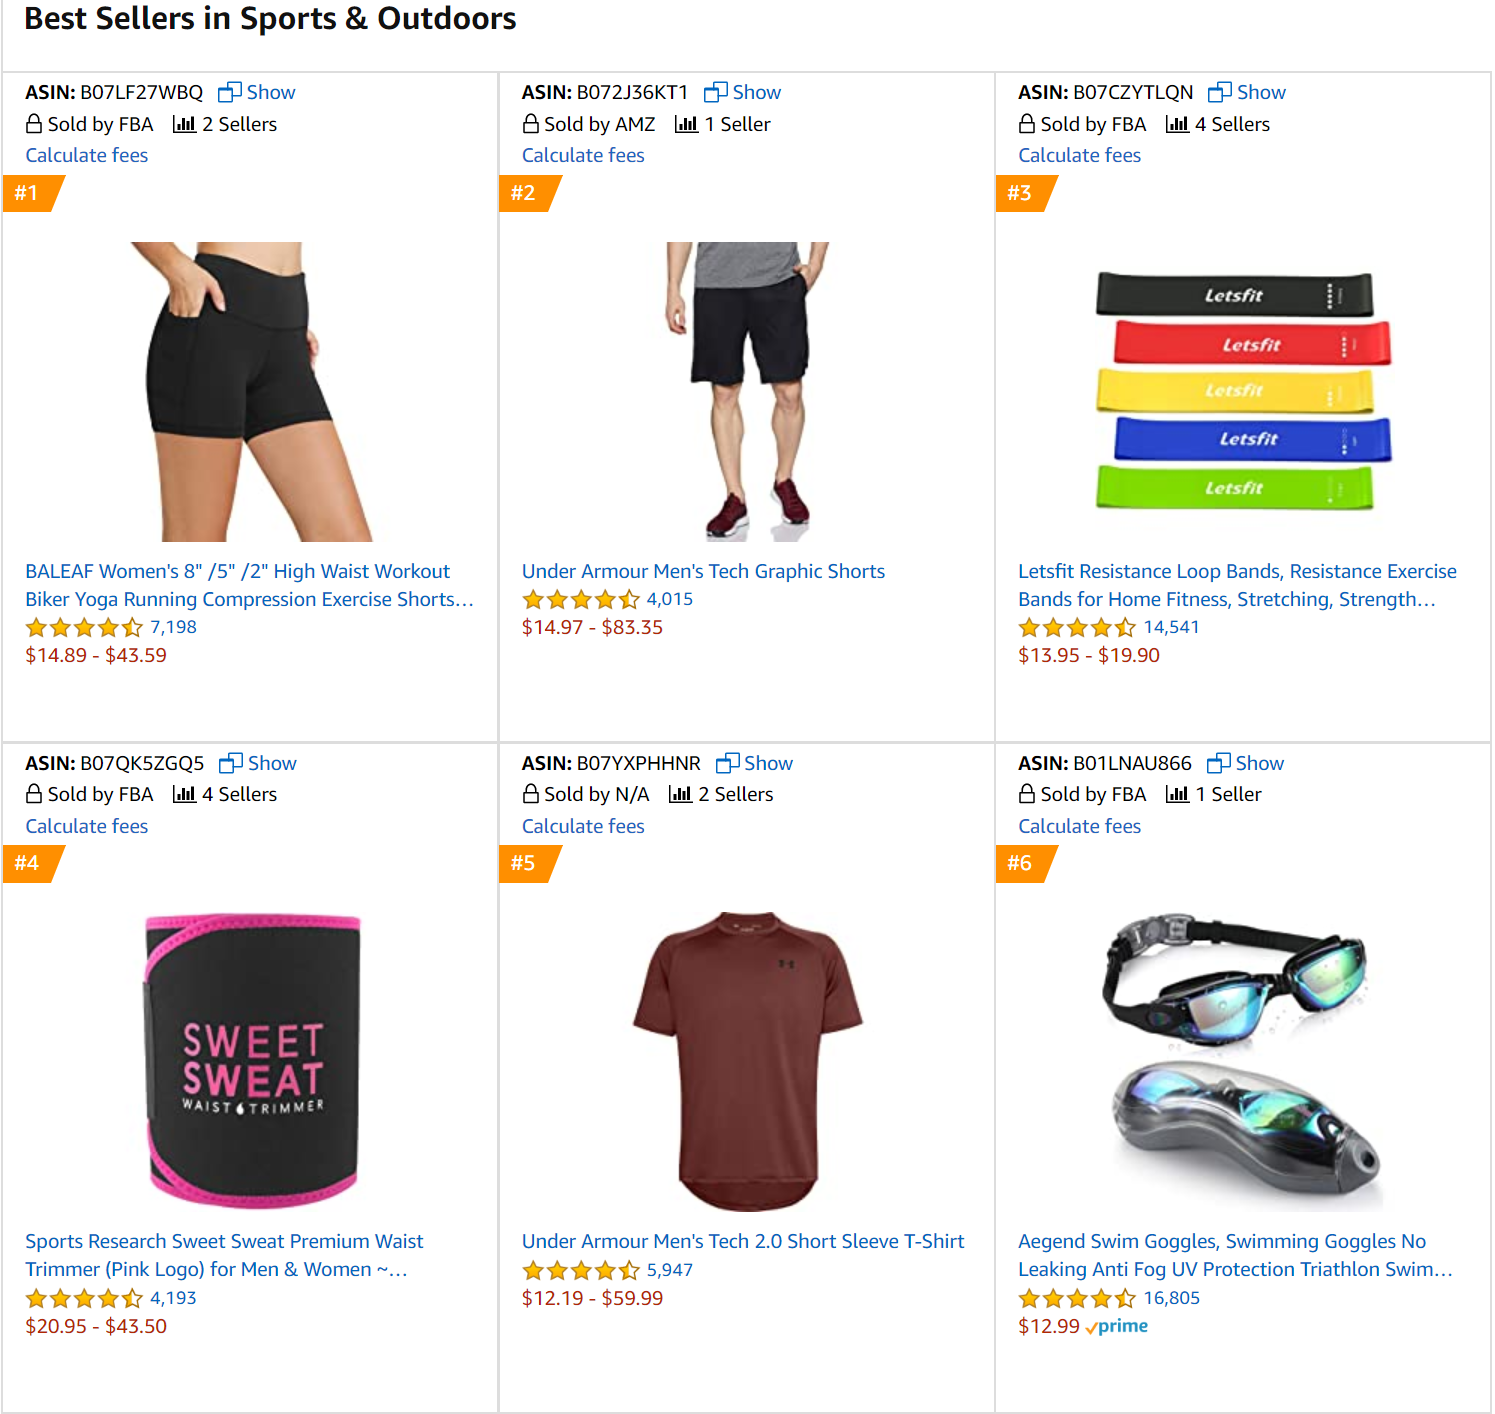 Best selling sports and outdoors category